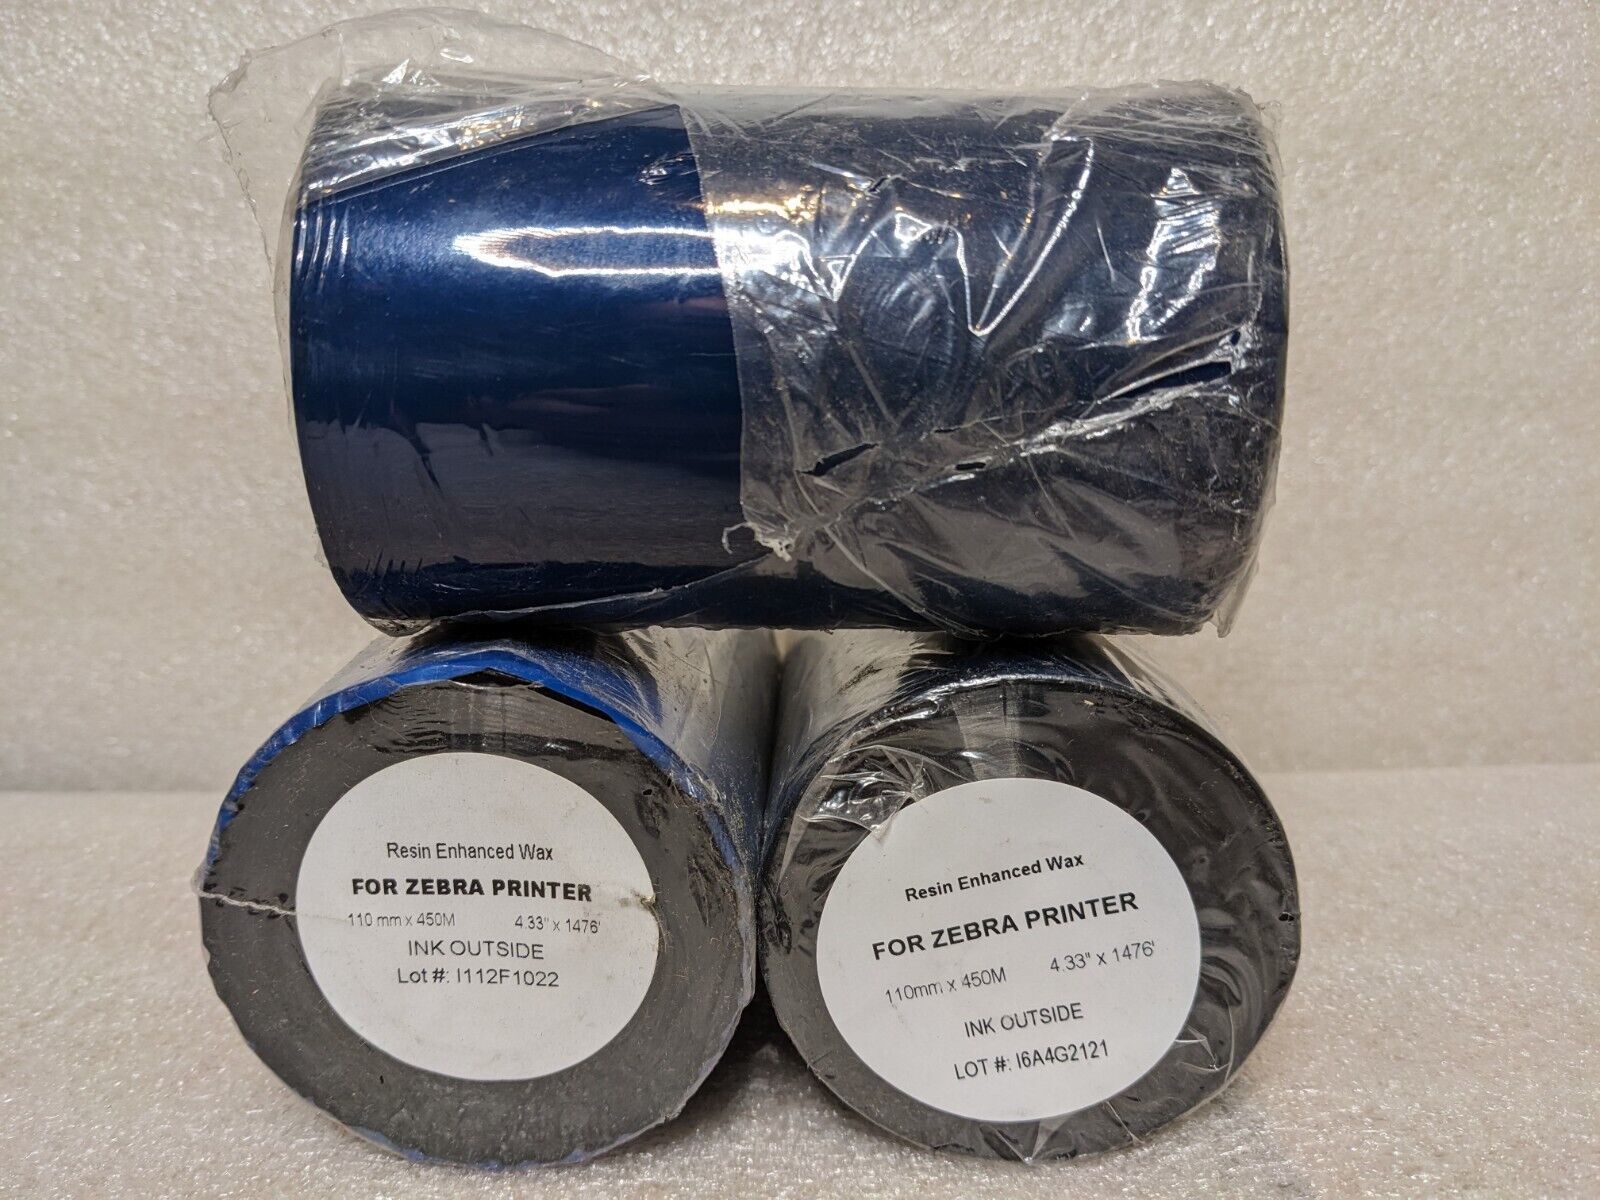 Primary image for 5 NEW Resin Enhanced Wax For Zebra Printer 110mm x 450m / 4.33" x 1476'